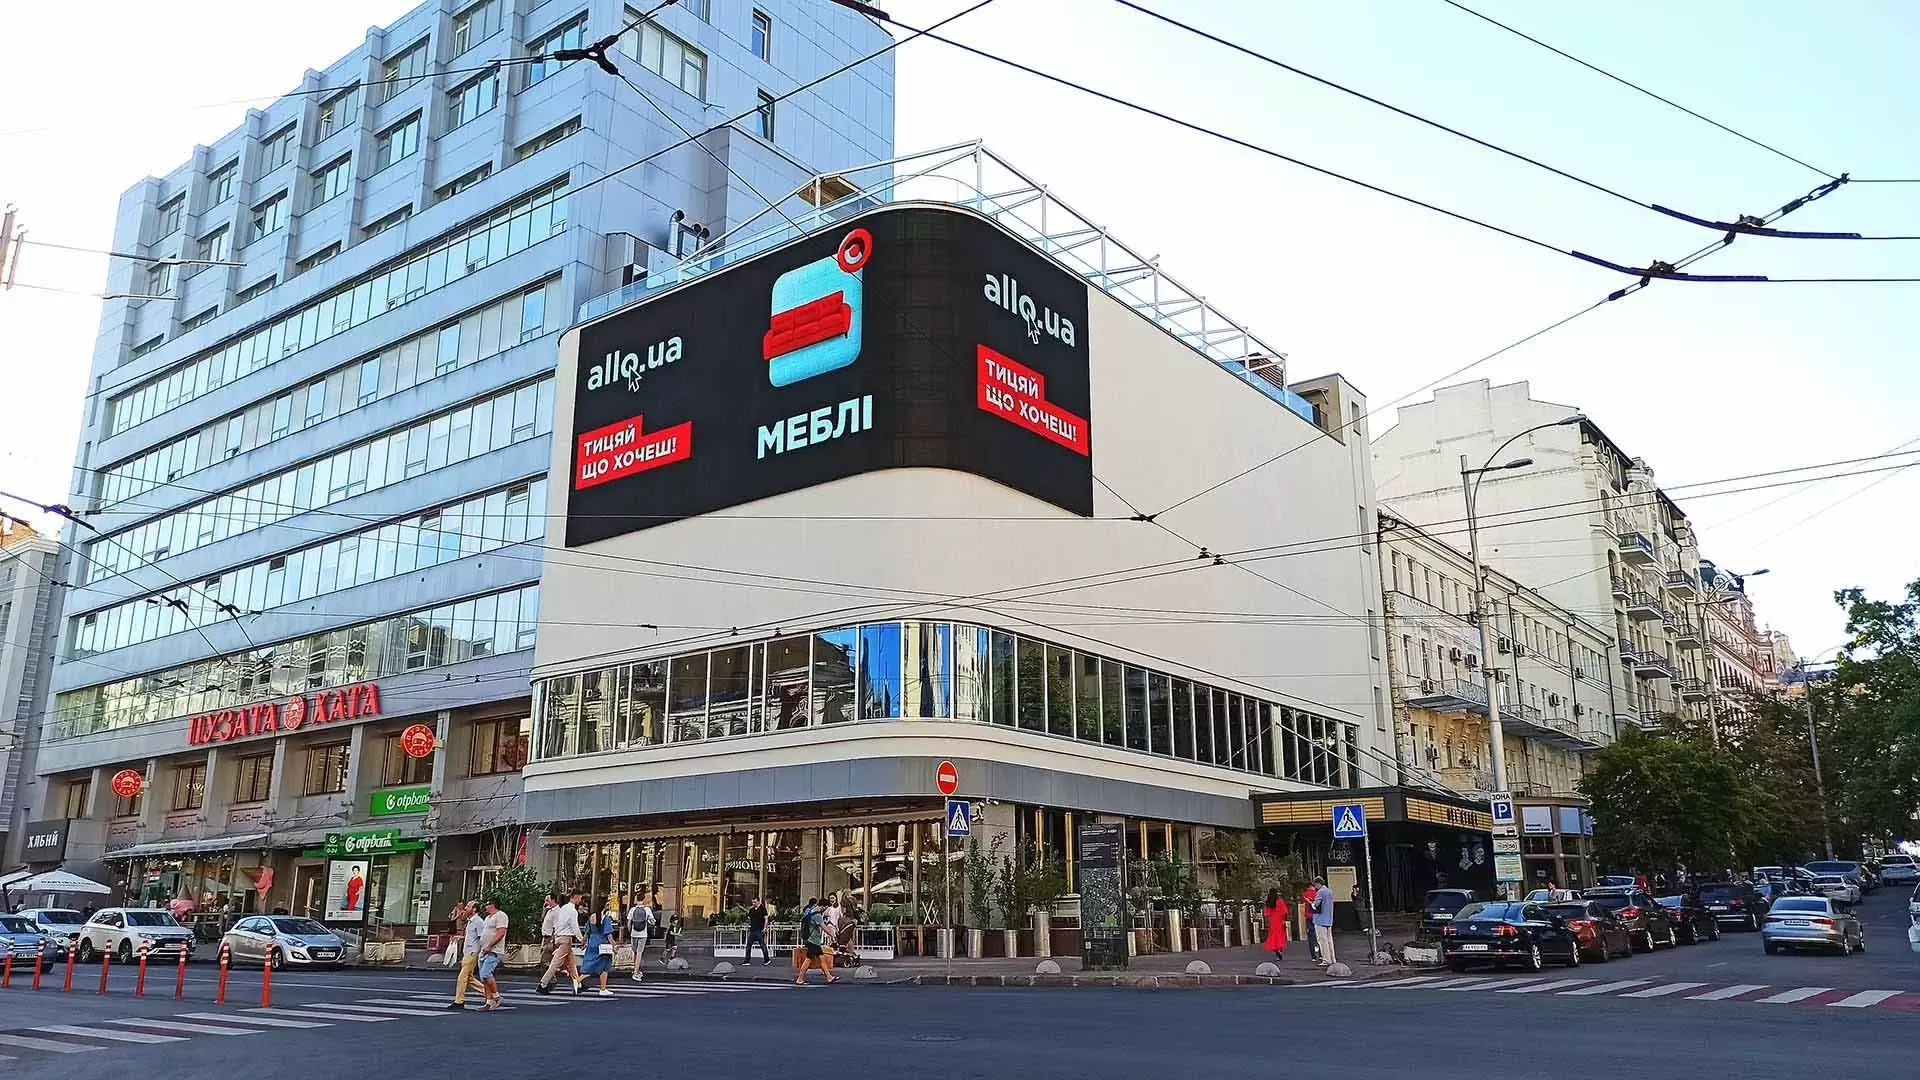 "MEGAPOLIS" INTRODUCES A NEW MEGA-FORMAT LED SCREEN! THE ONLY CURVED MEDIA FACADE IN UKRAINE